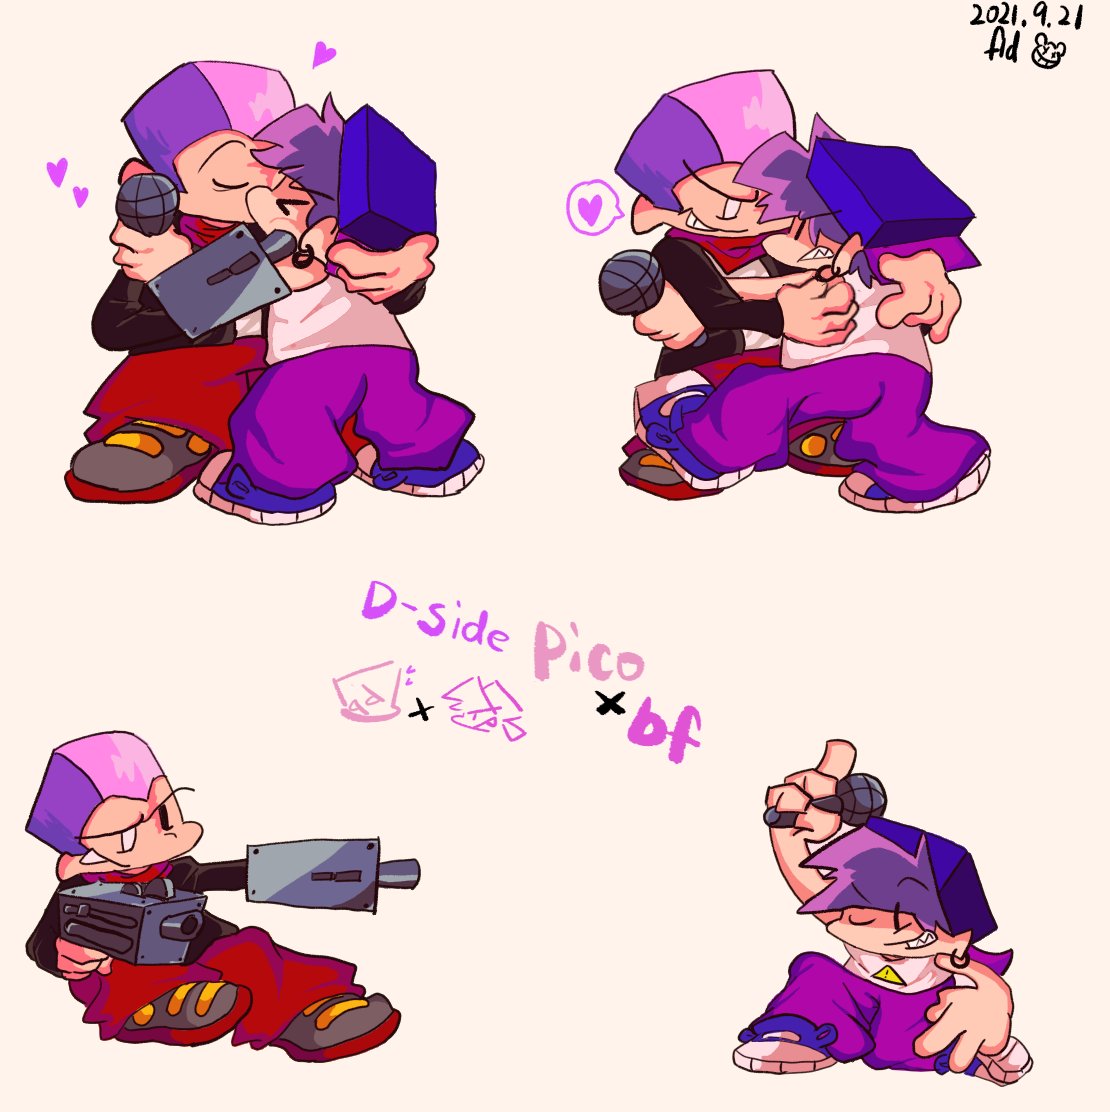 2boys alternate_universe boyfriend_(friday_night_funkin') dated earrings english_text friday_night_funkin' friday_night_funkin'_d-sides fulaidi1 grin gun hat heart heterochromia holding holding_gun holding_microphone kiss microphone pants pico_(pico's_school) pink_hair purple_hair sharp_teeth simple_background smile standing tan_background weapon yaoi